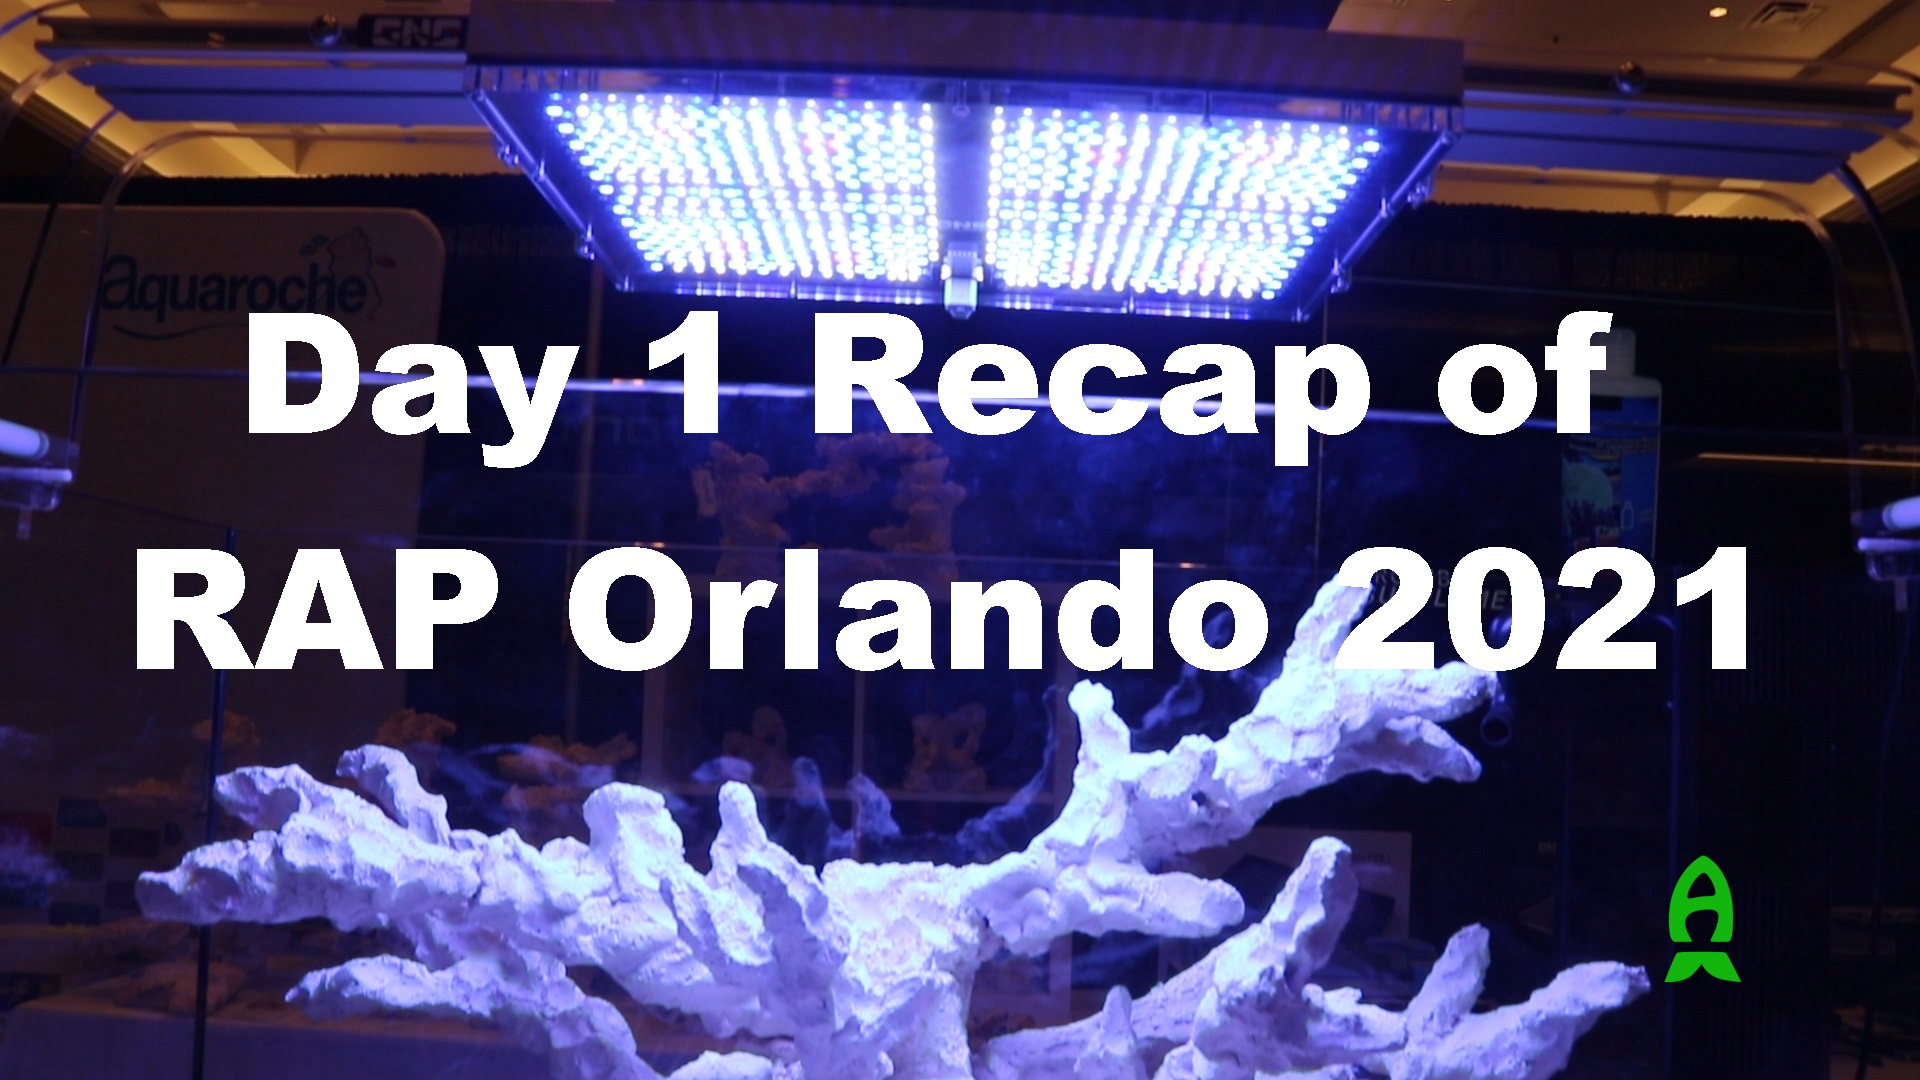 Reef A Palooza Orlando Day 1 Recap. Favorite Corals and New Equipment